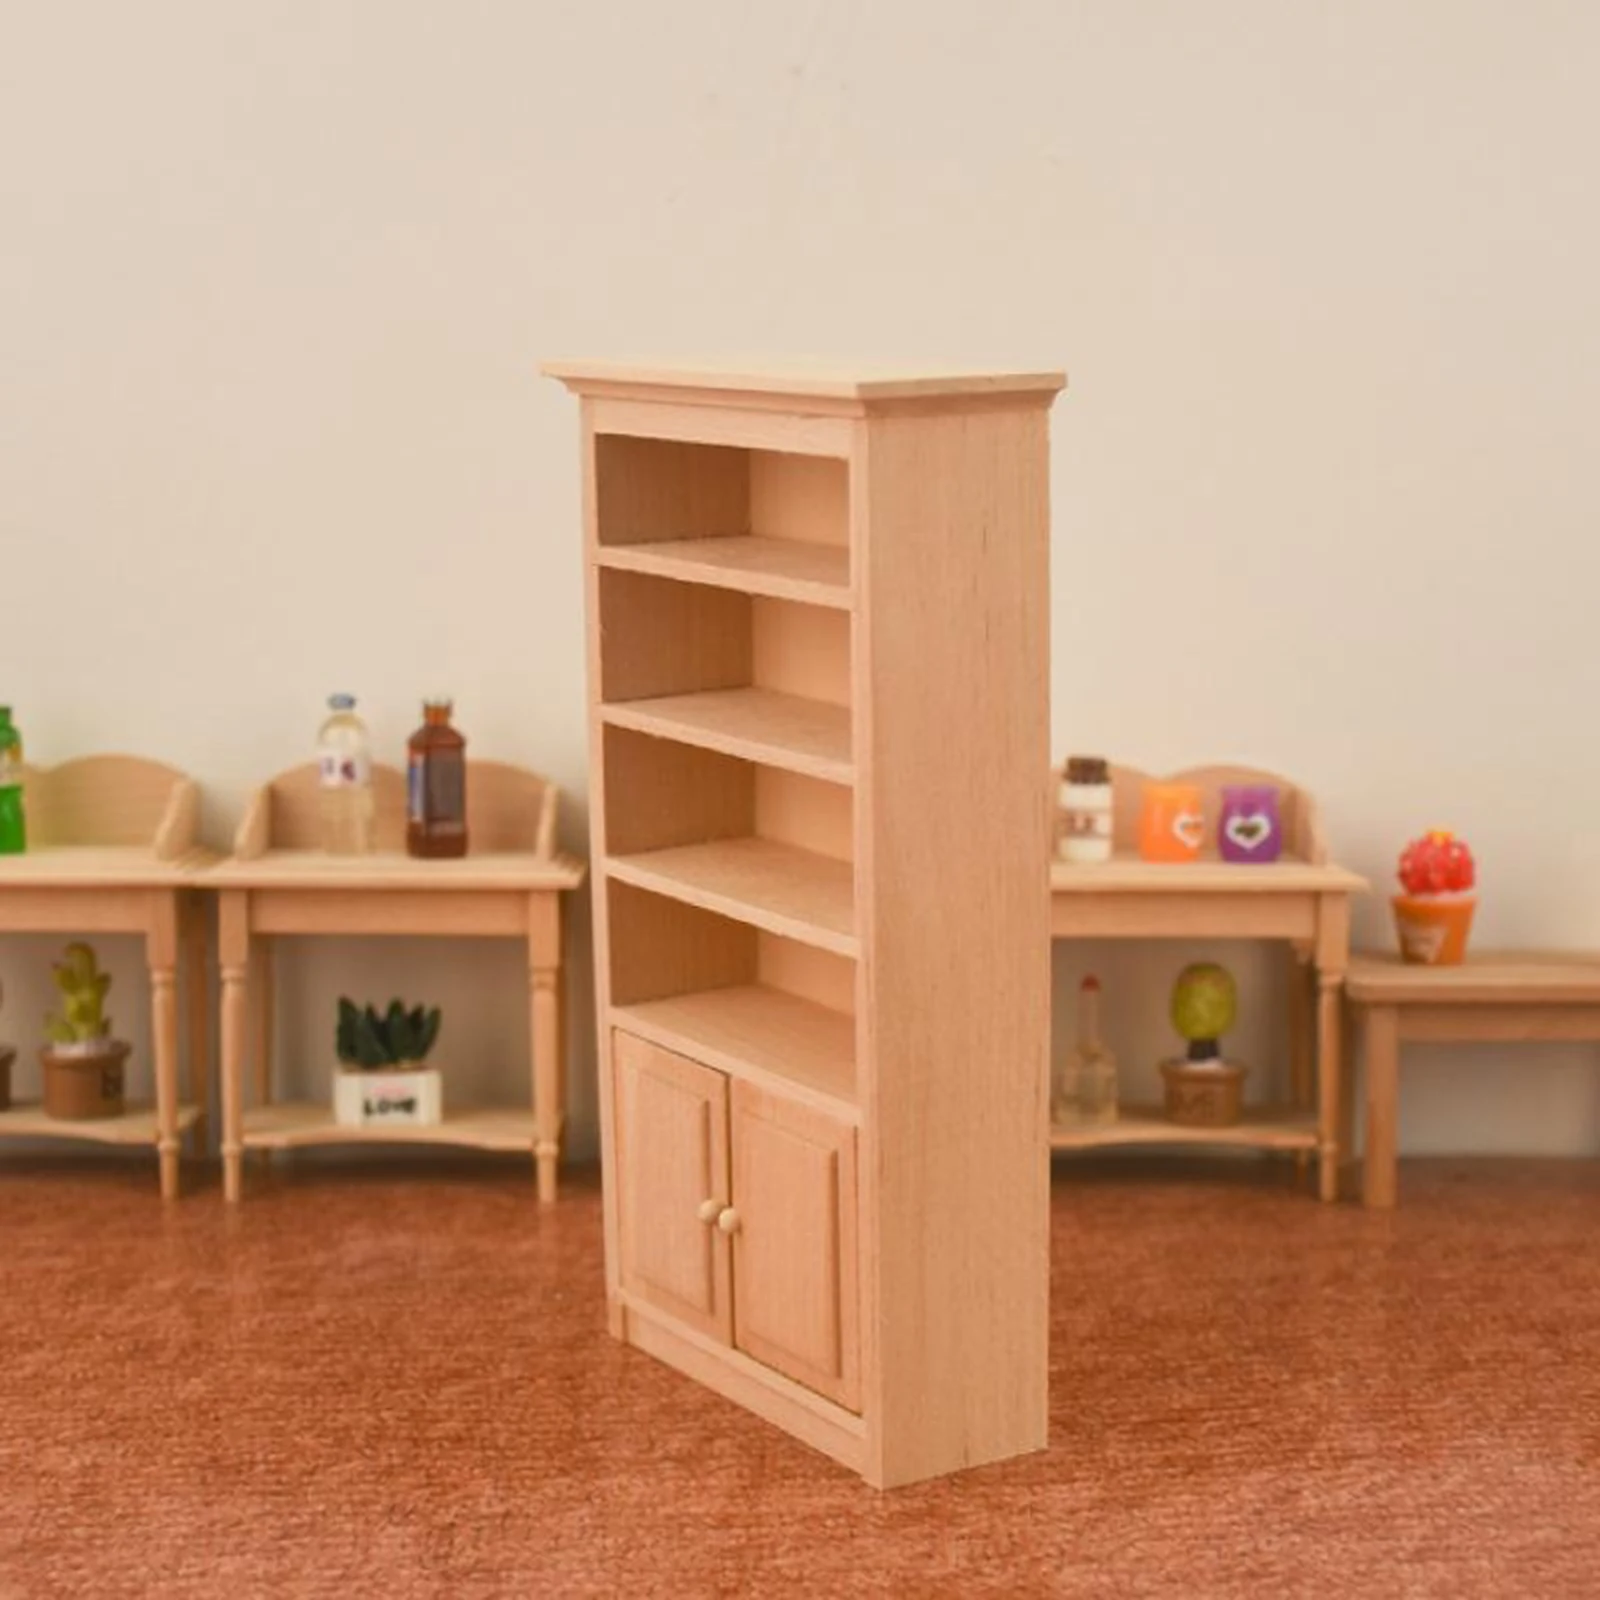 1/12 Doll House Mini Cabinet Simulation Model Baby Doll Furniture Scenery